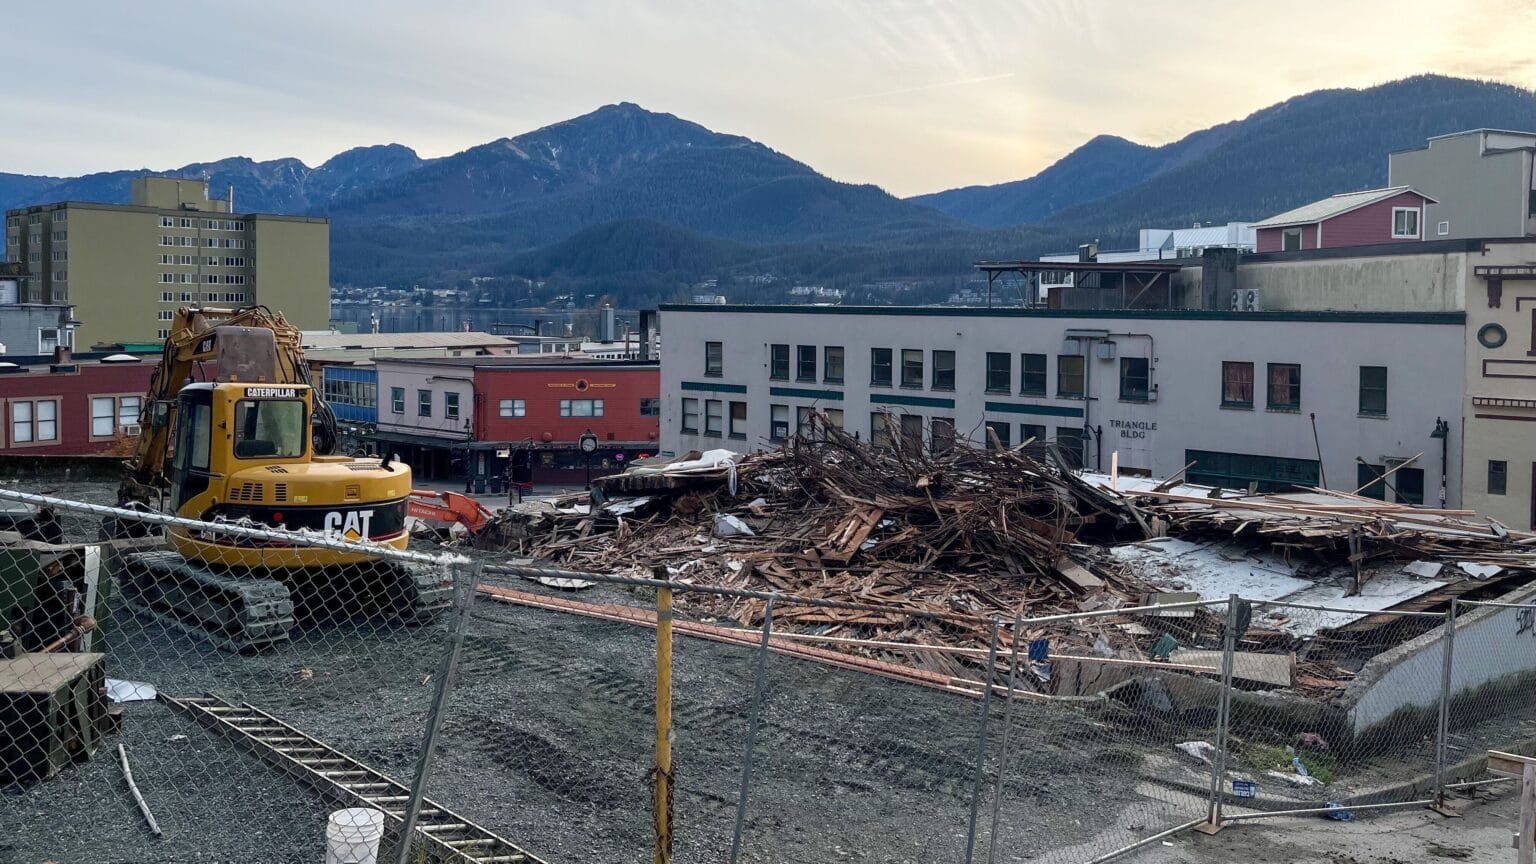 After sitting unoccupied for years, the Elks Hall building in downtown Juneau is being demolished